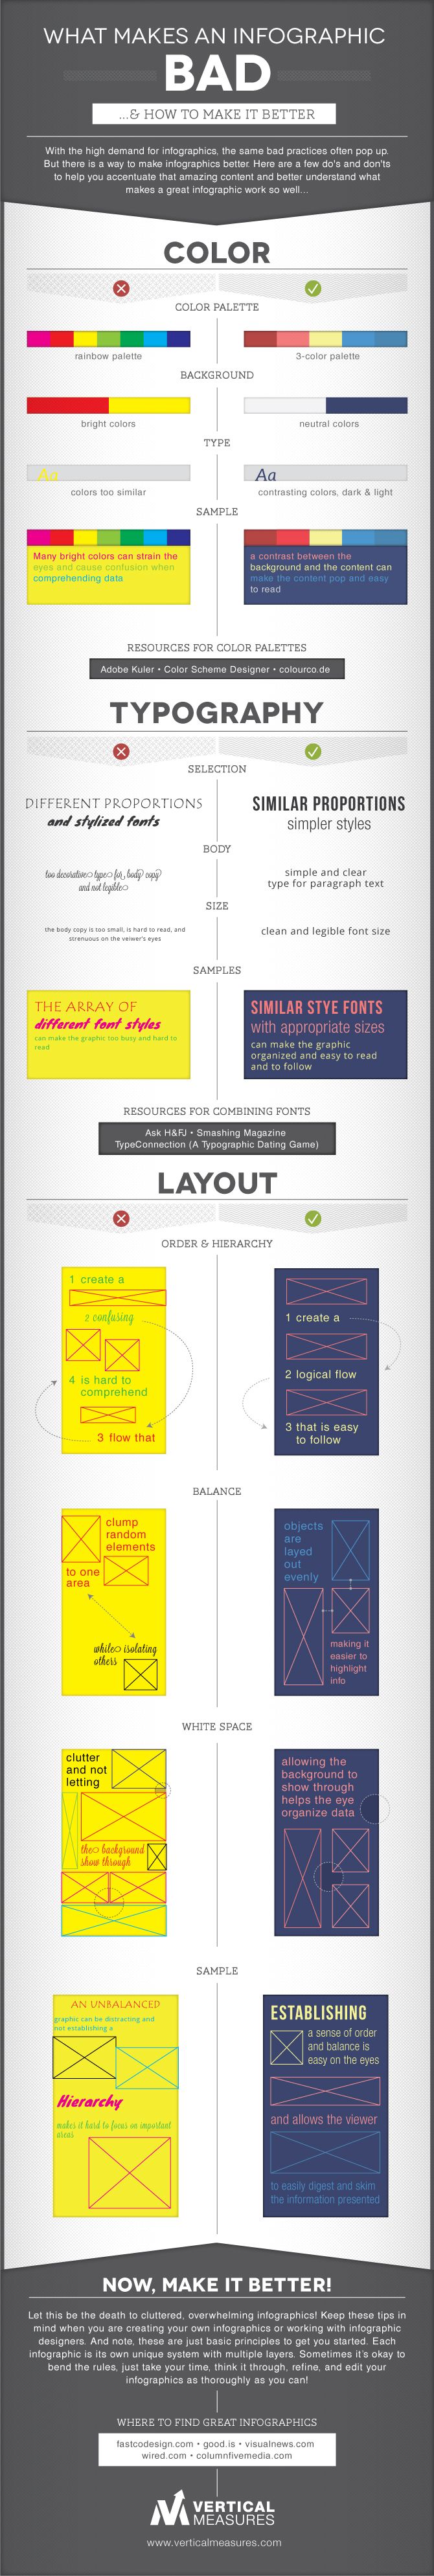 What Makes An Infographic Bad & How To Make It Better [INFOGRAPHIC]